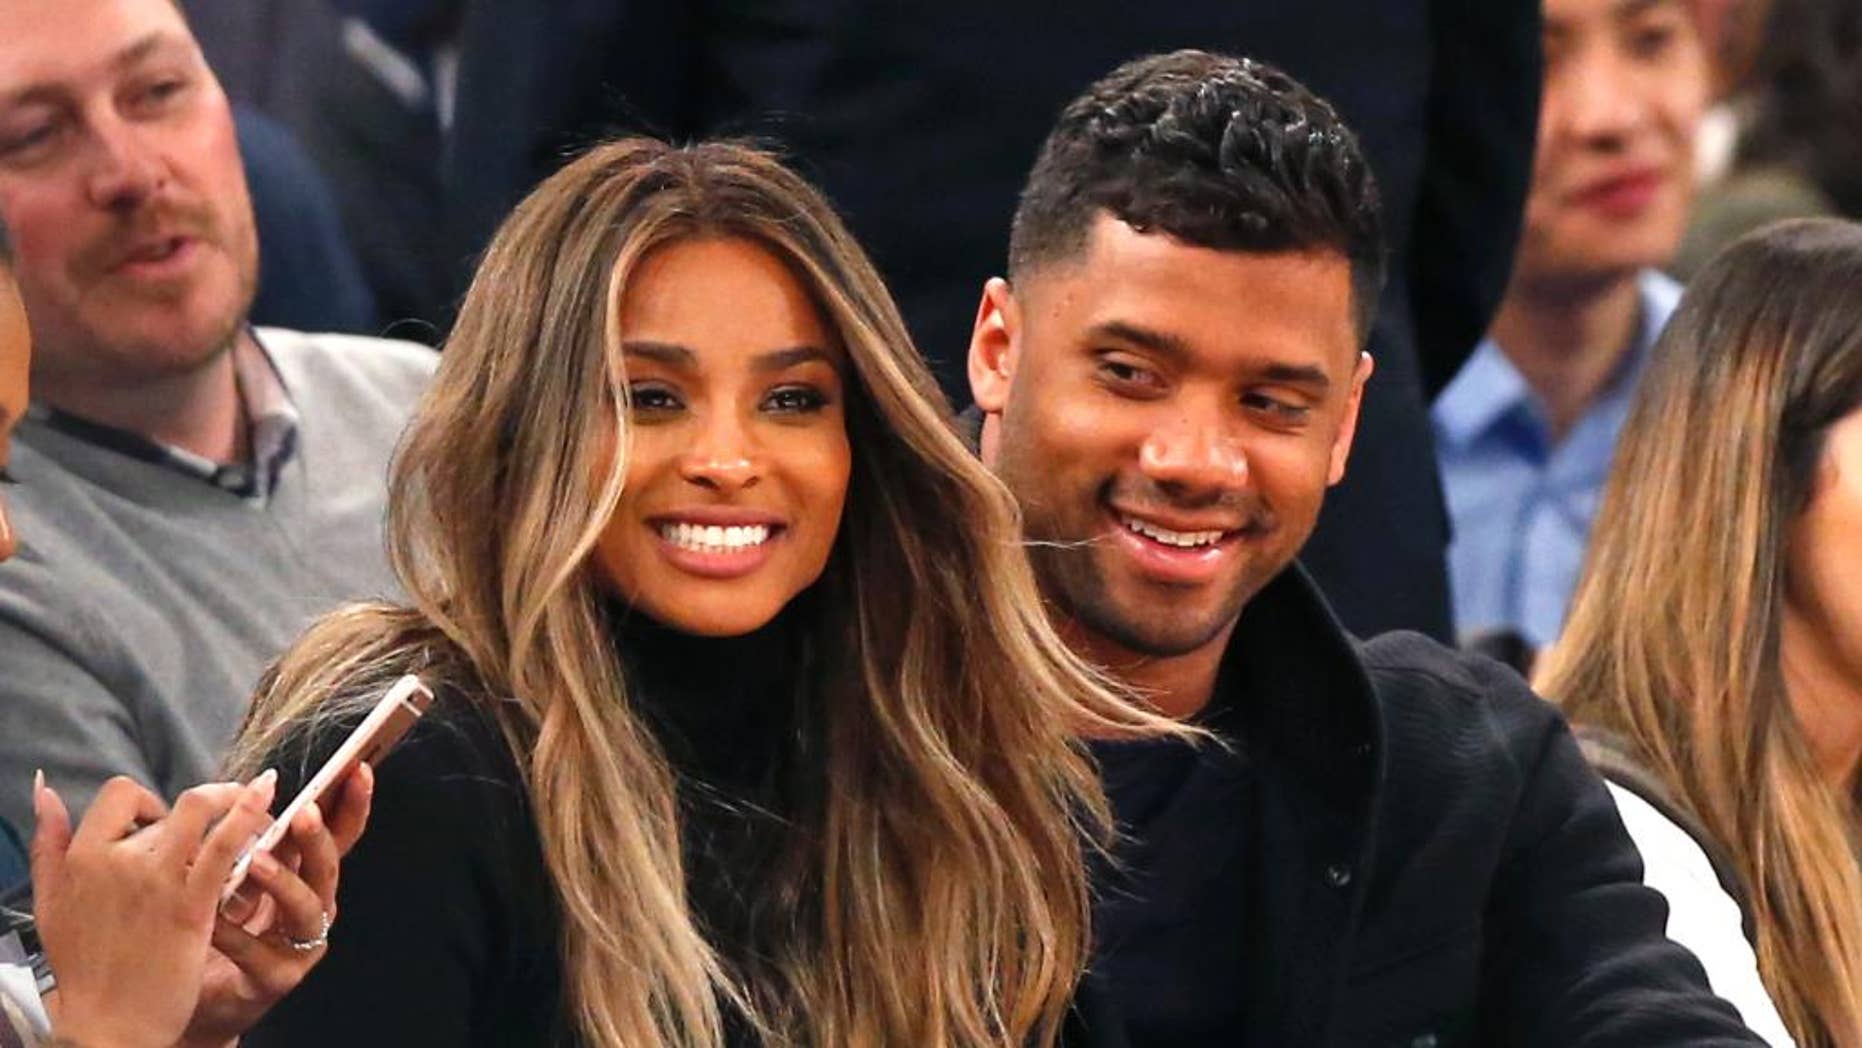 Russell Wilson, wife Ciara seemingly respond after her ex Future slams Wilson for ‘not being a man’